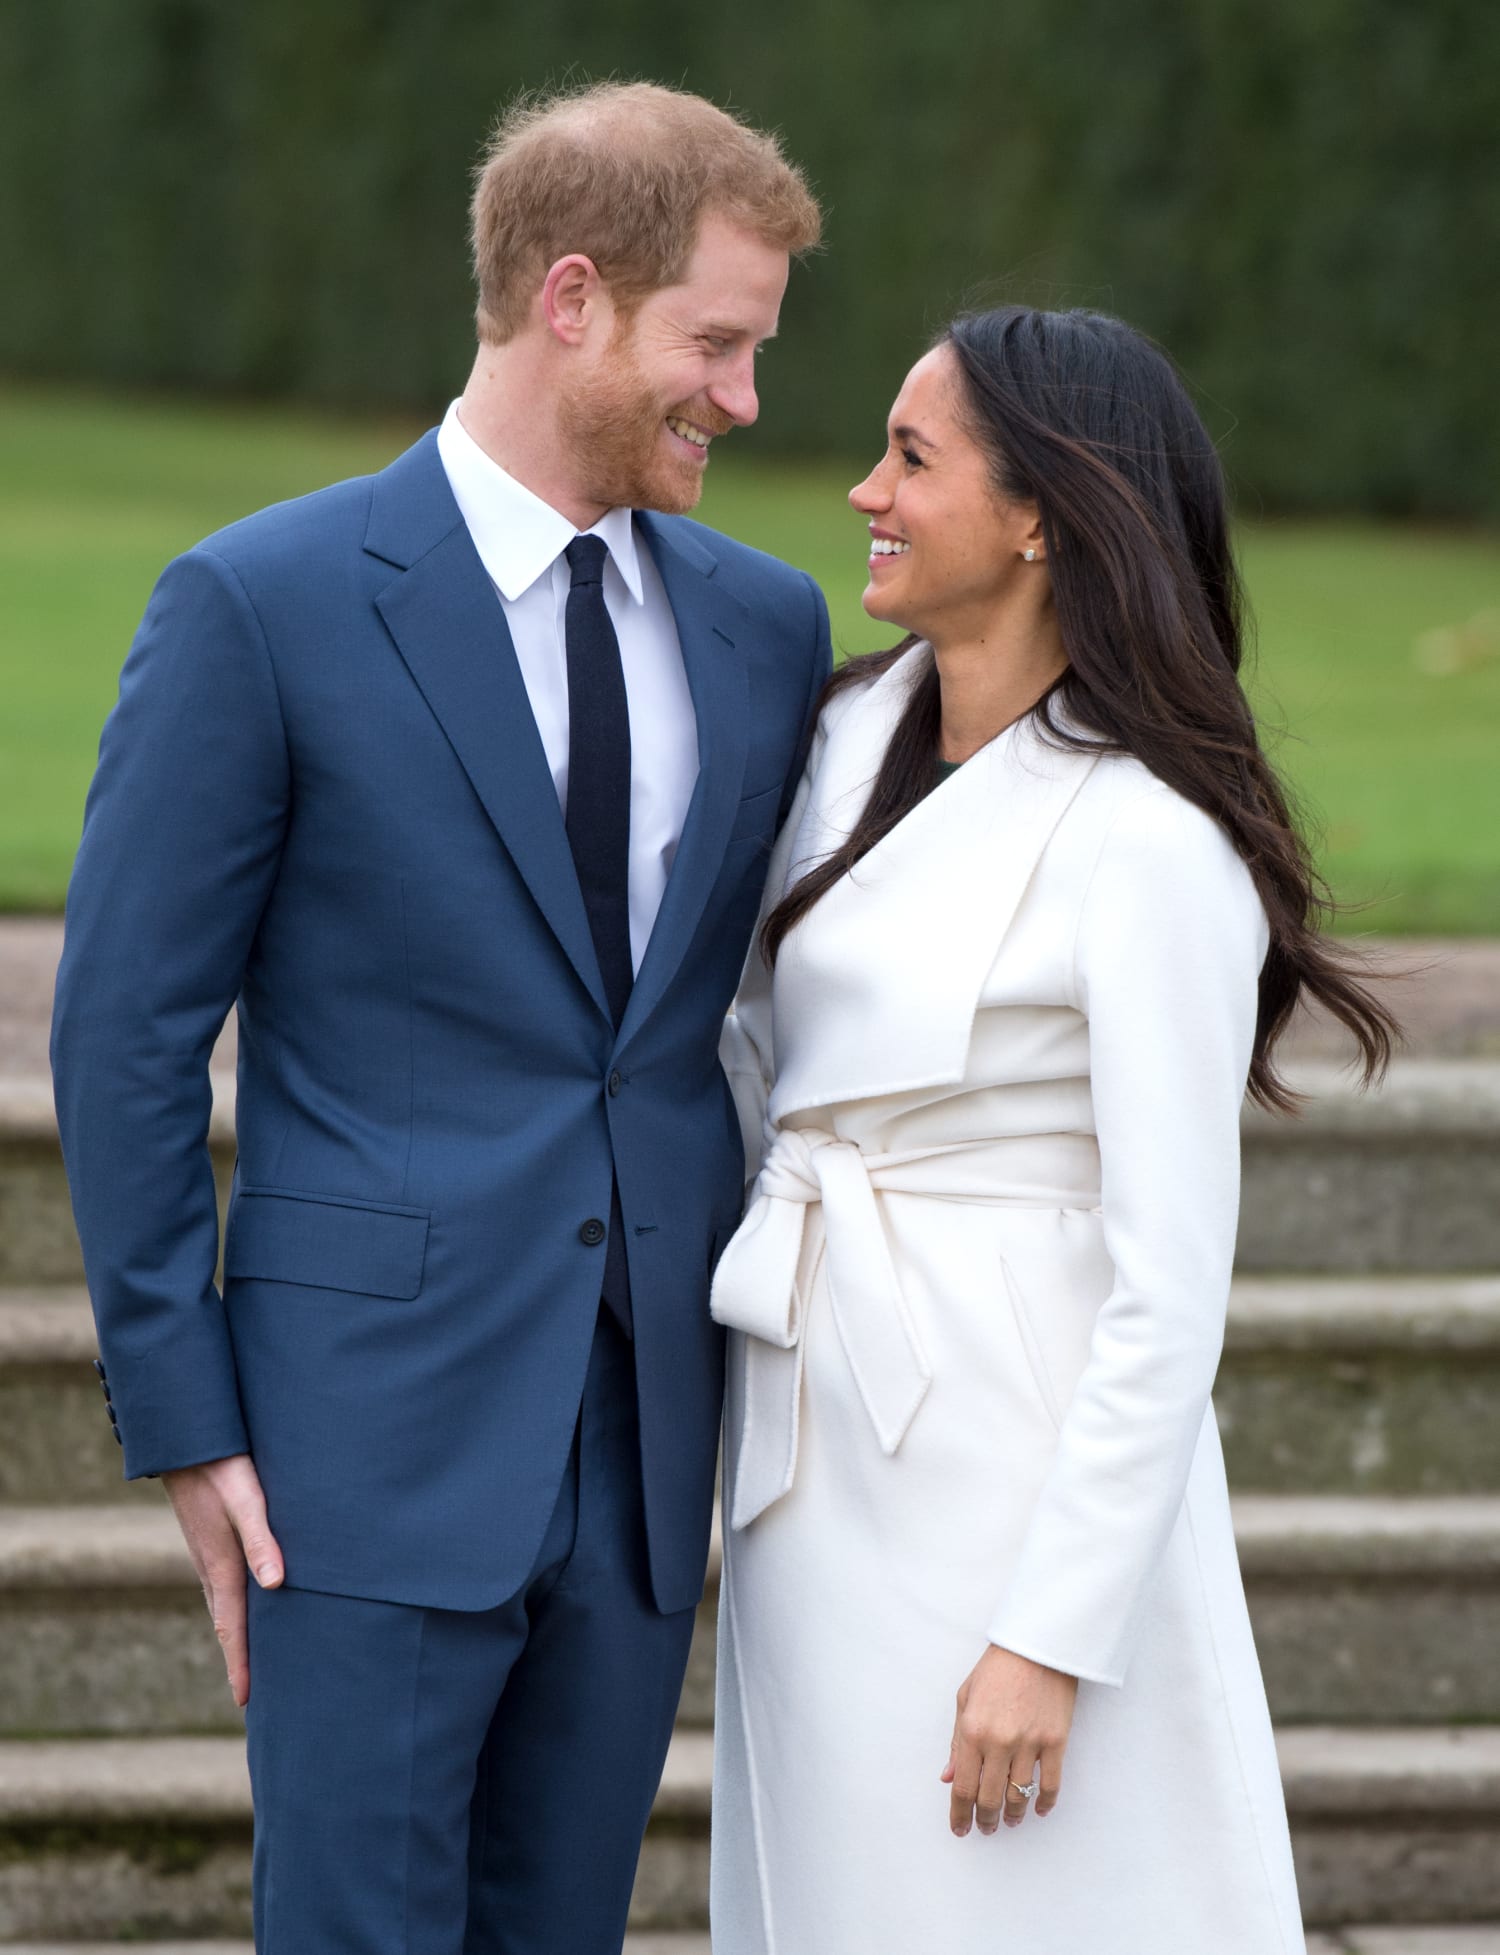 Prince Harry and Meghan Markle's relationship timeline, in their own words